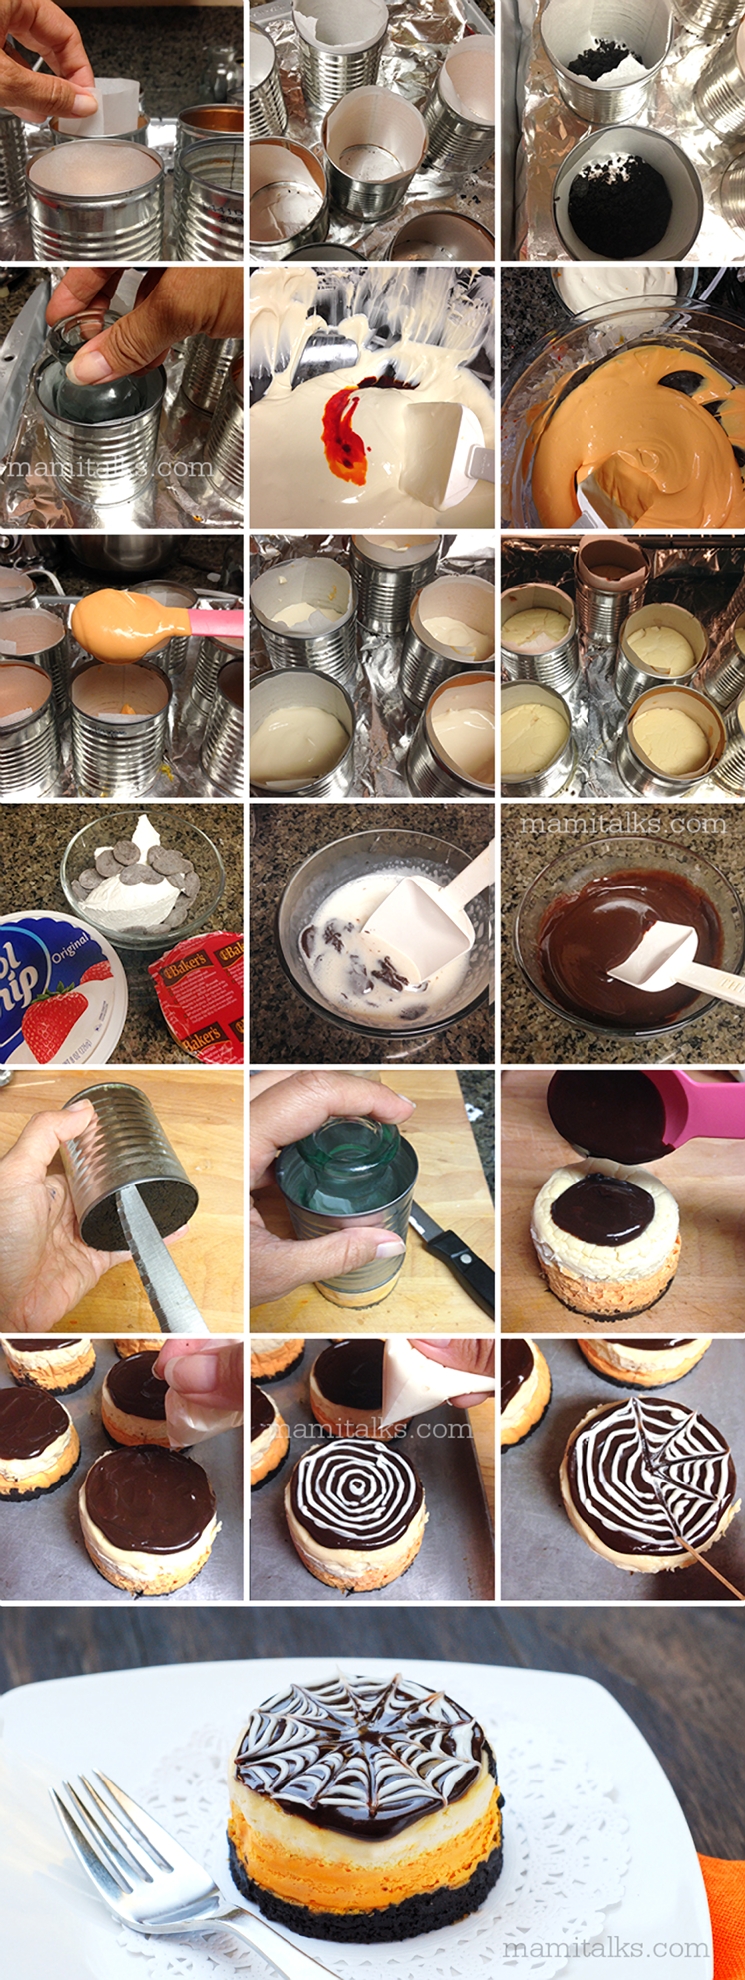 Step-by-step tutorial for making Halloween Mini-Cheesecakes -MamiTalks.com